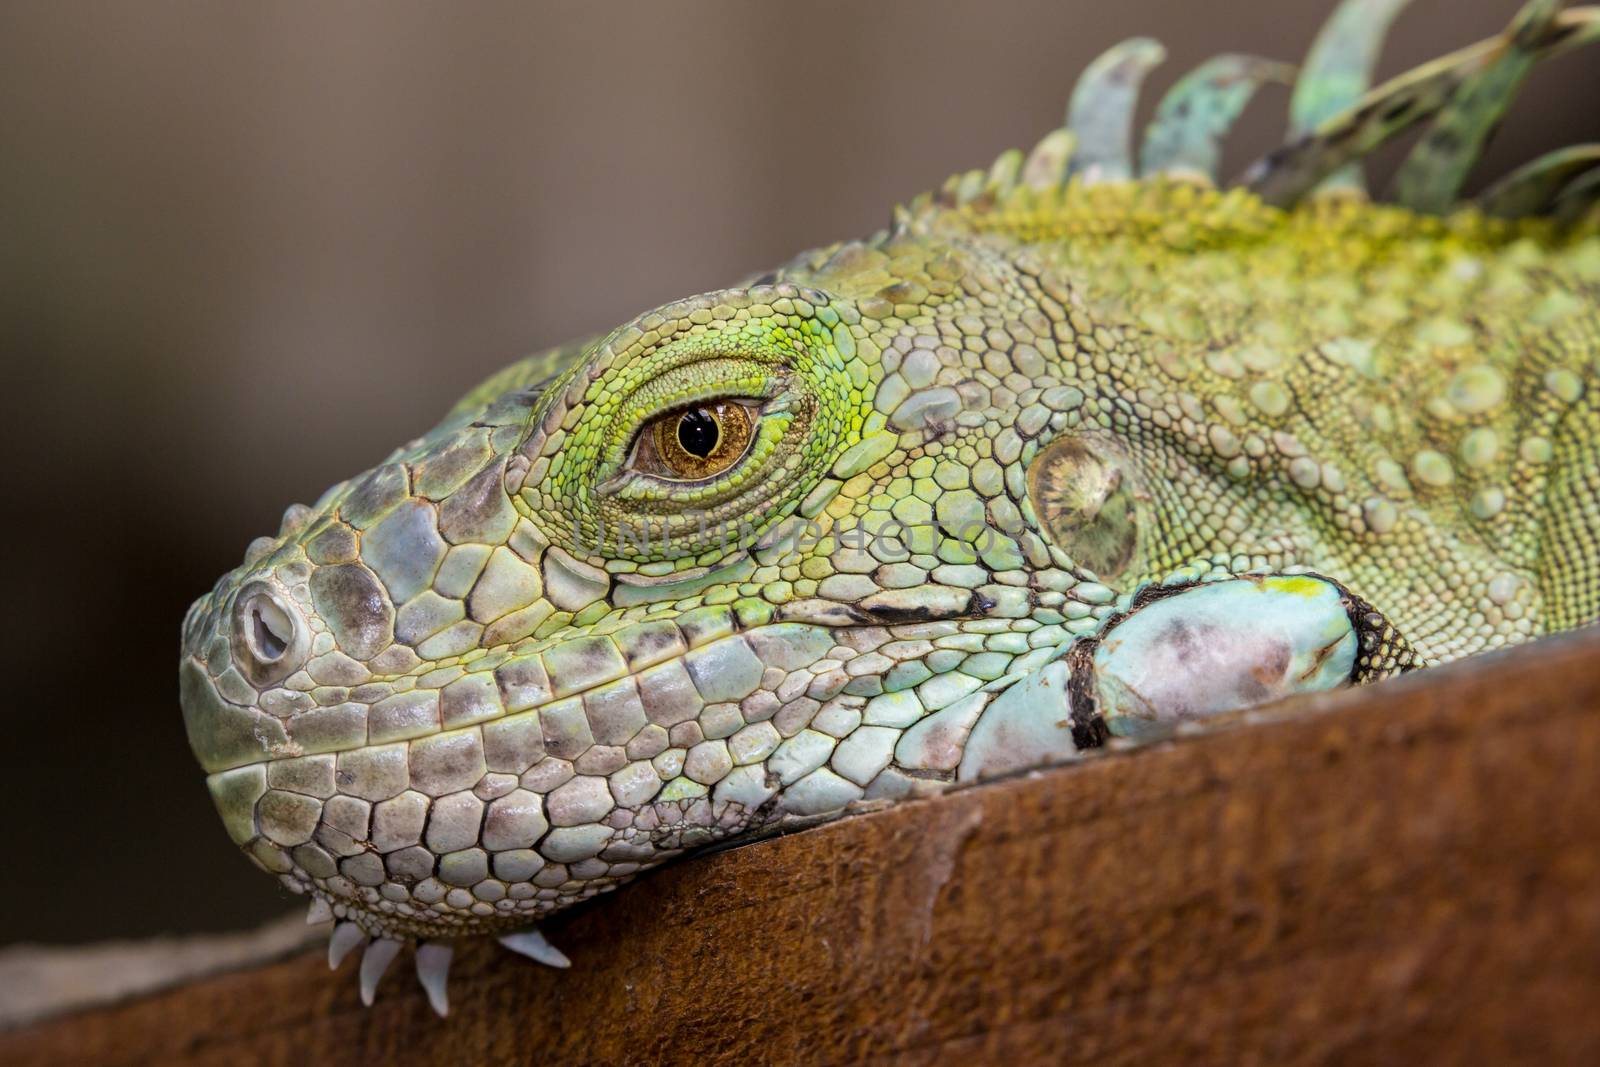 Green Iguana reptile with delicately detailed skin